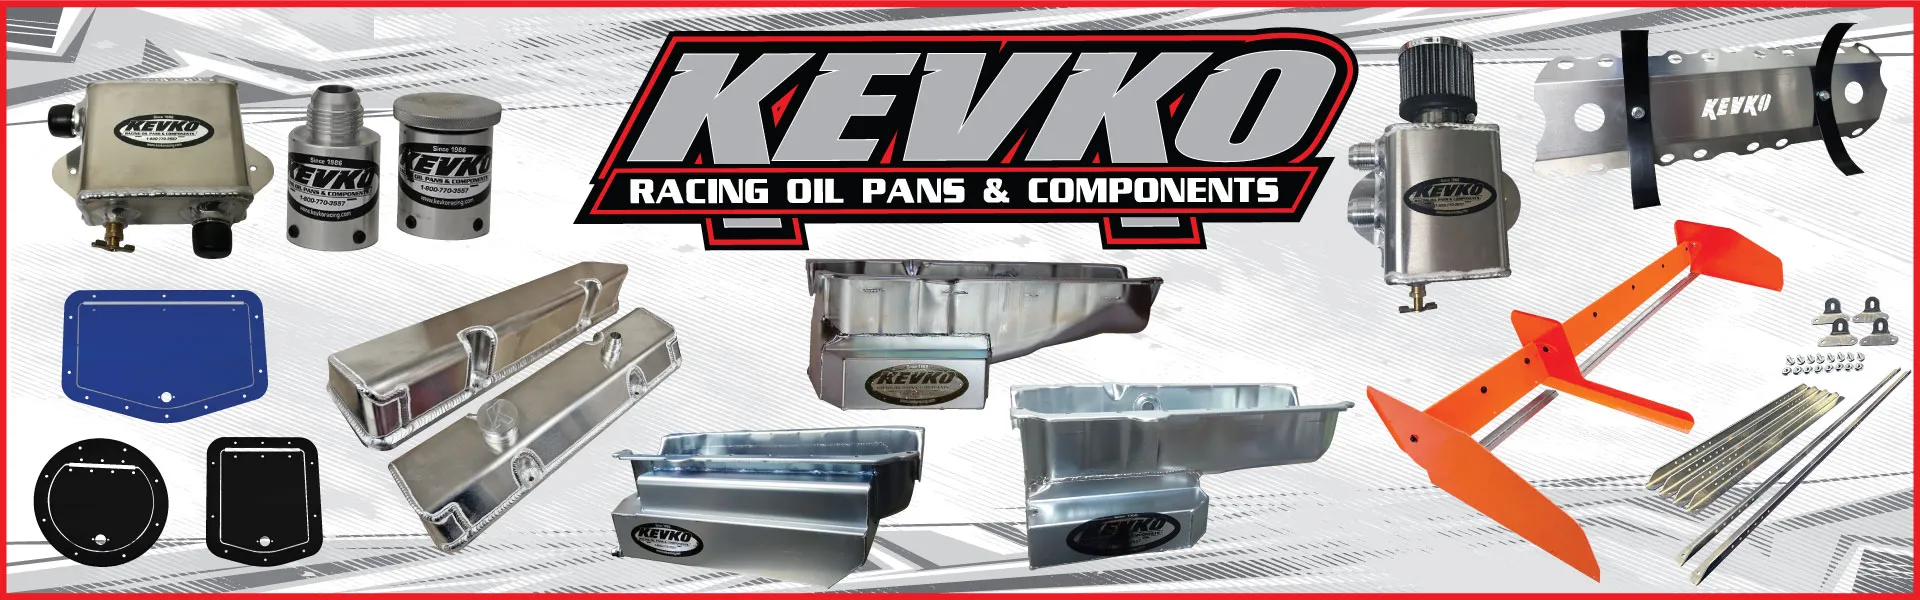 Kevko Racing Oil Pans & Components products are available at Day Motor Sports for your circle track race car, trailer, or shop.